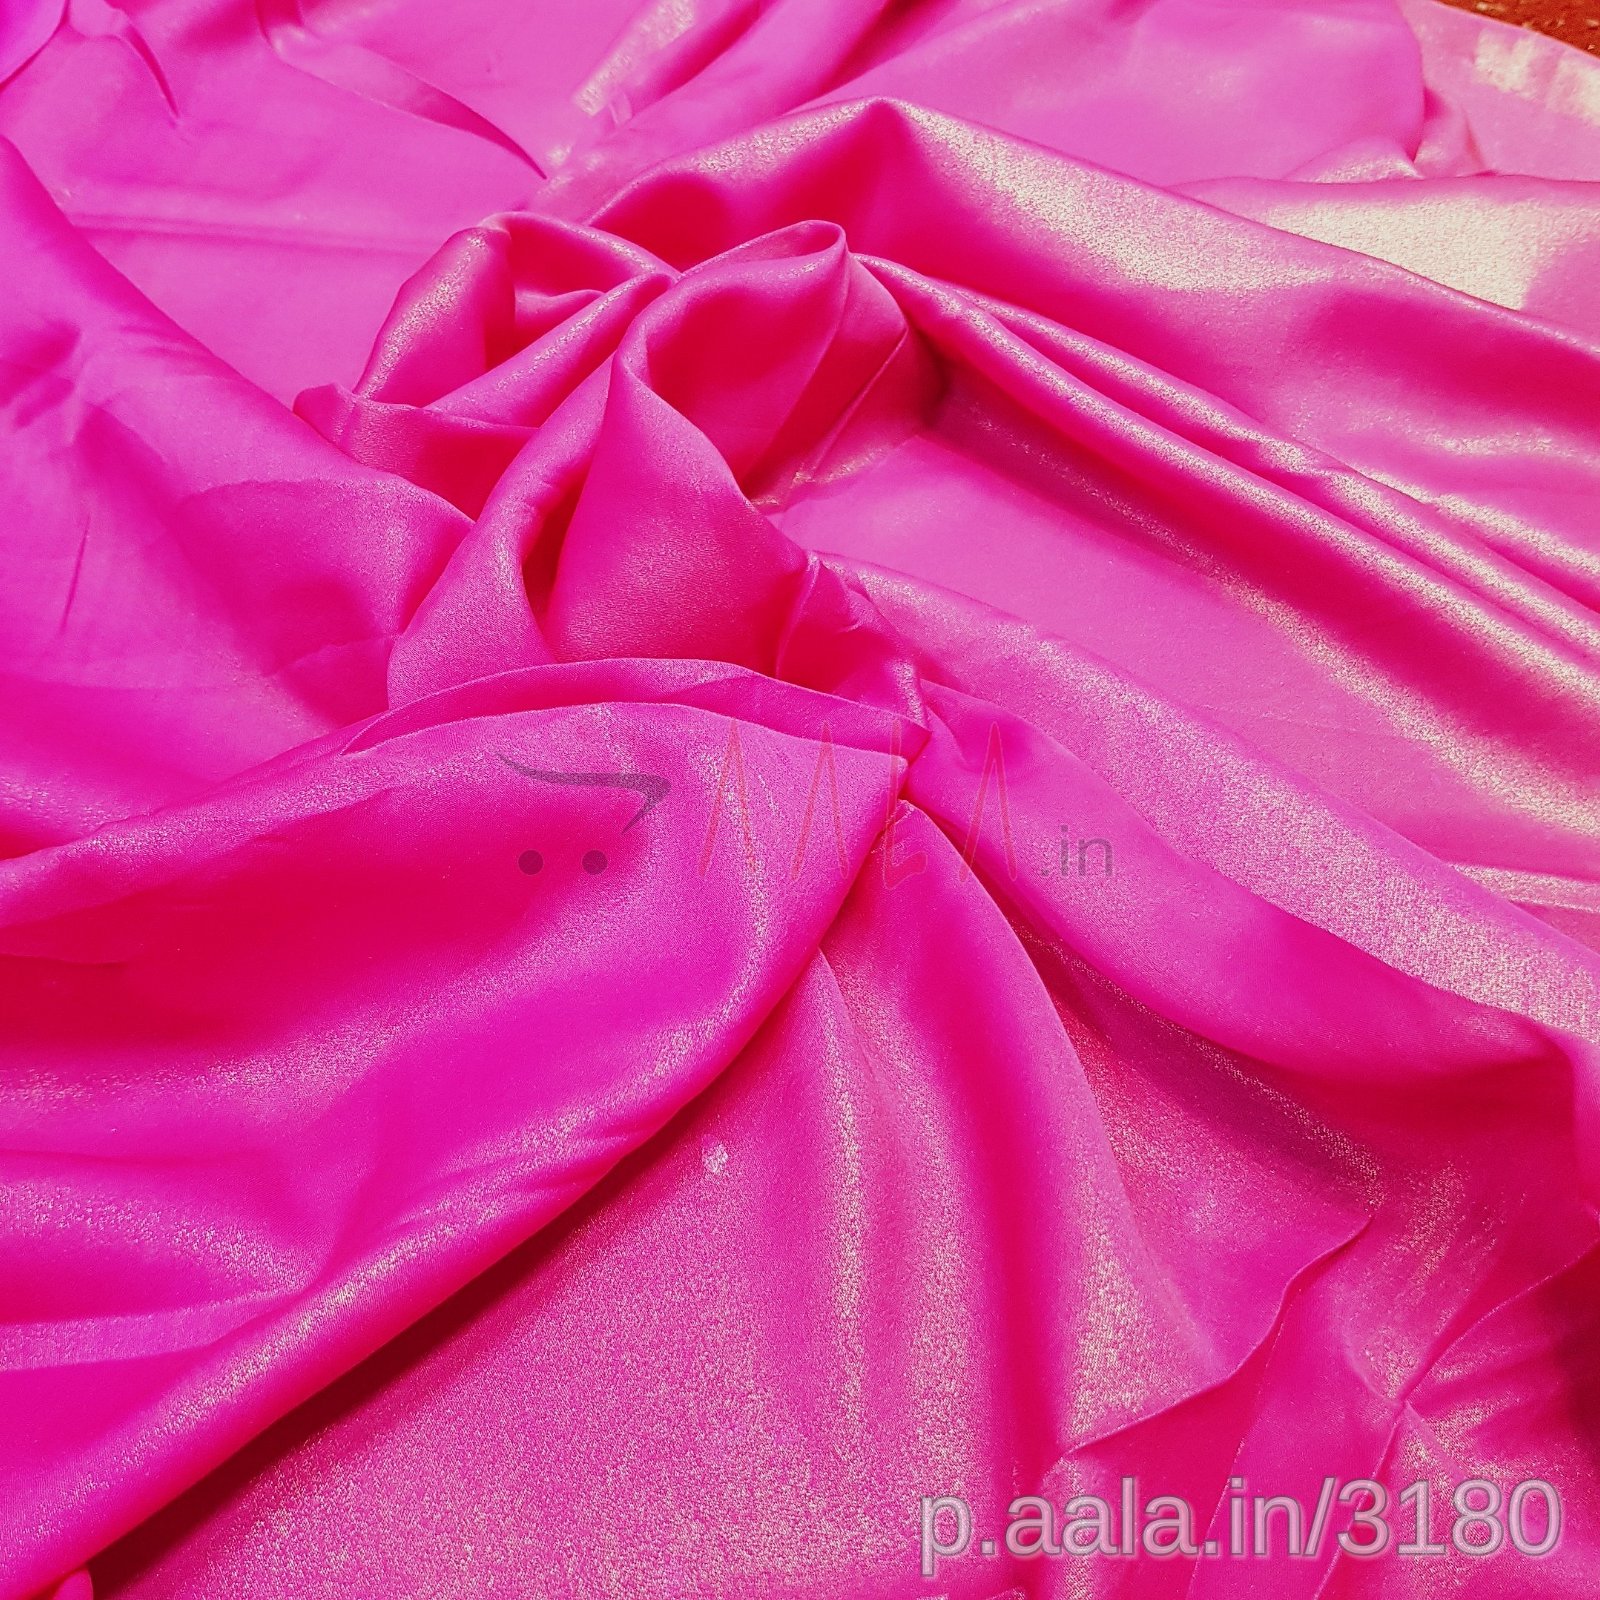 Foil Satin Georgette Poly-ester 44 Inches Dyed Per Metre #3180